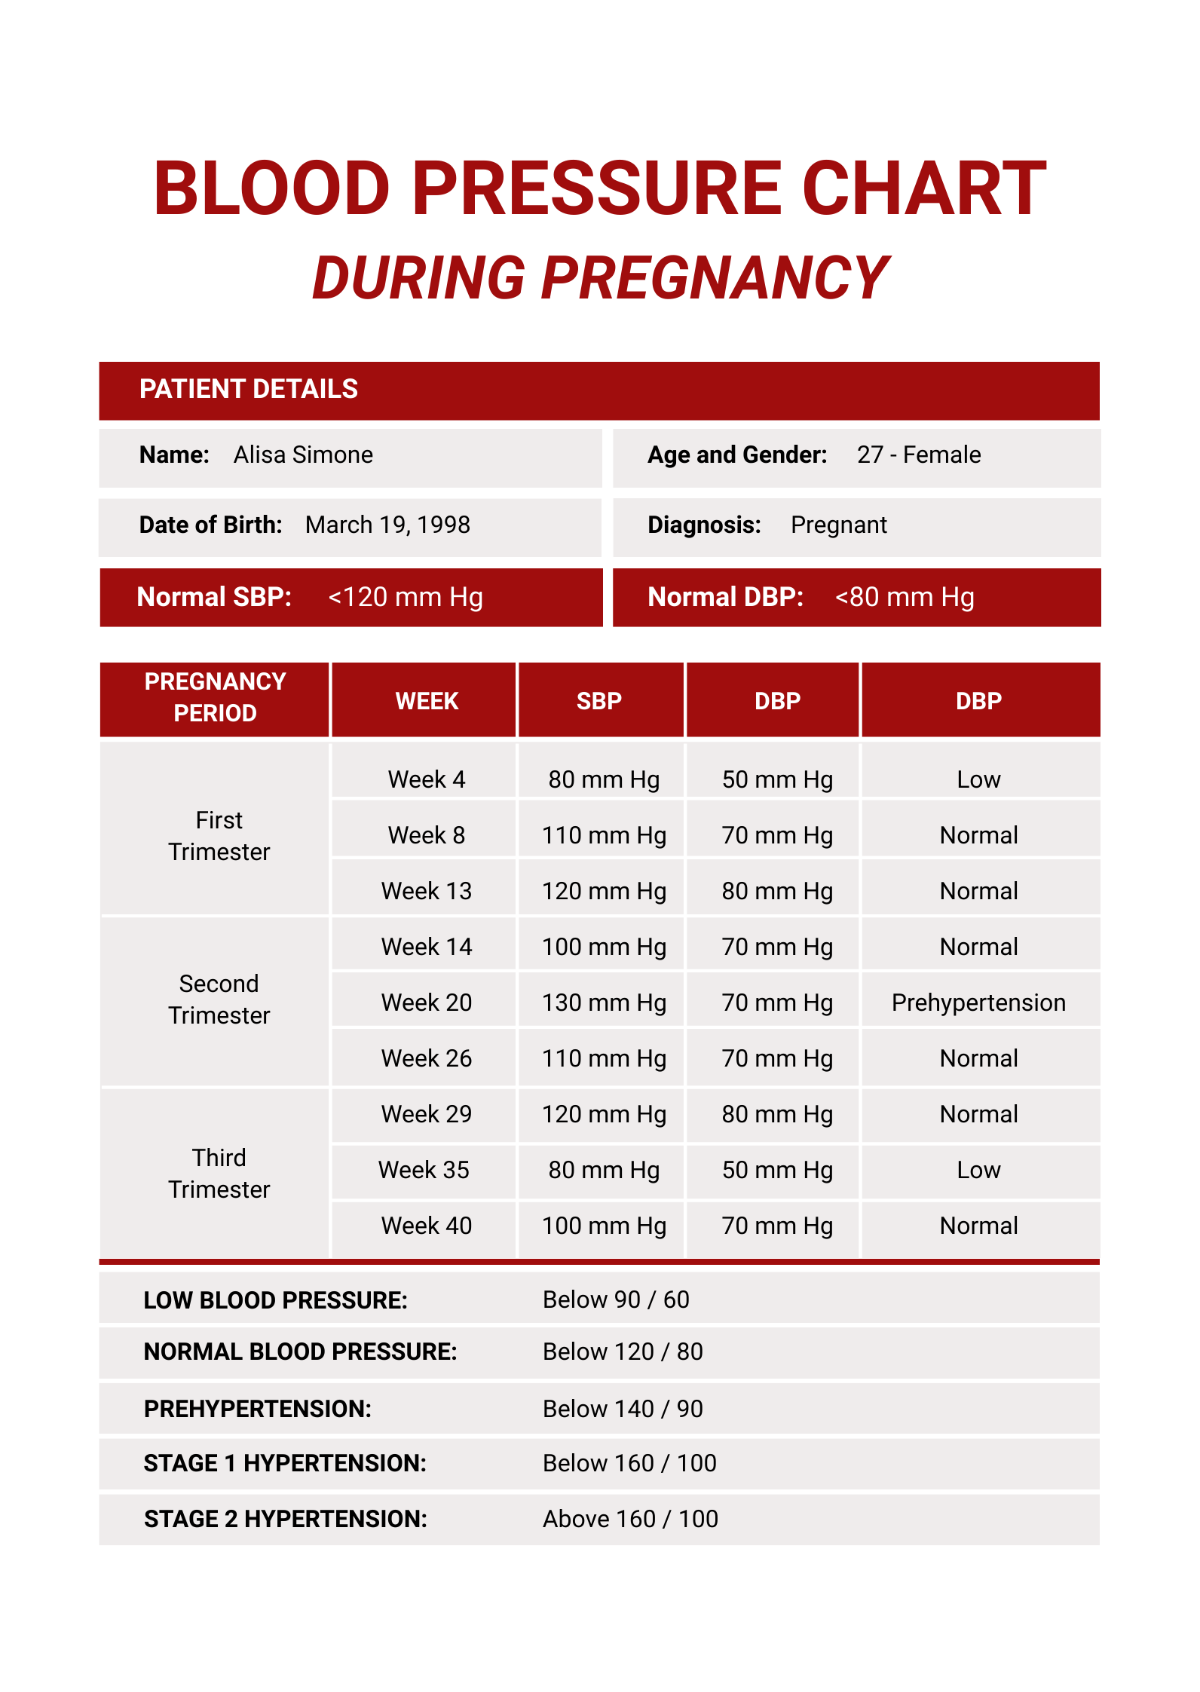 Normal Blood Pressure Range During Pregnancy Chart Template